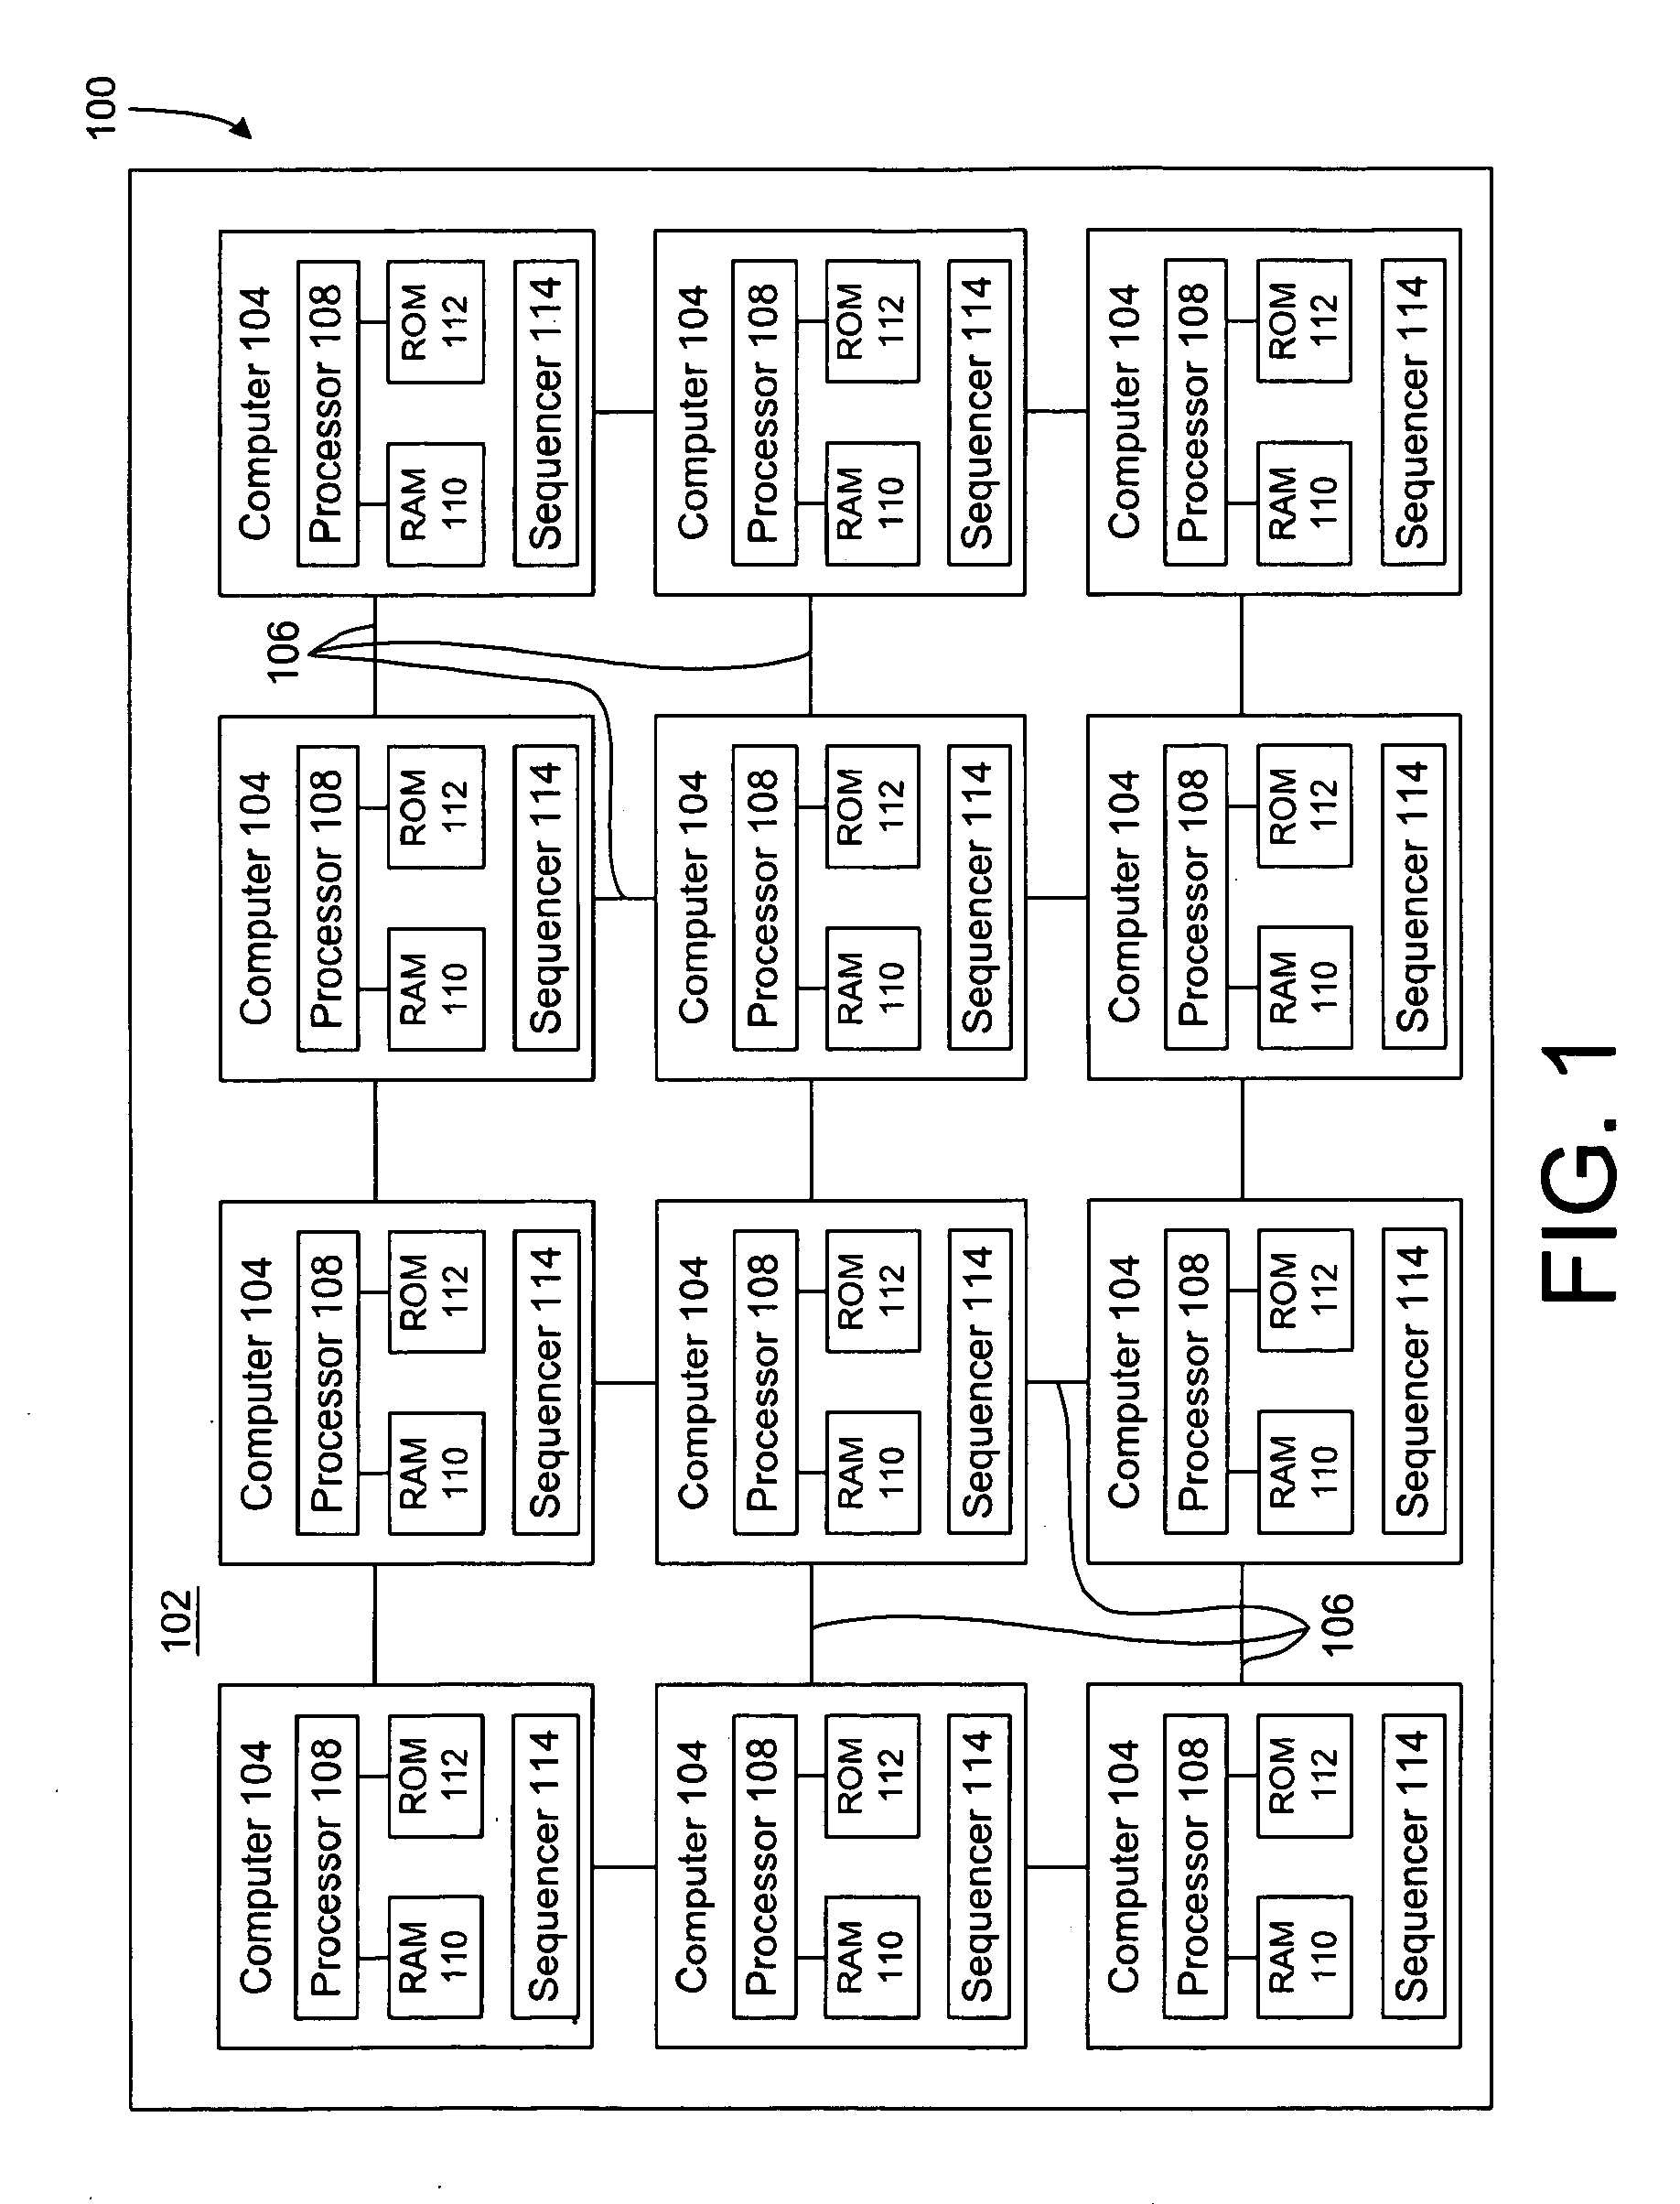 System and Method for Reading Memory